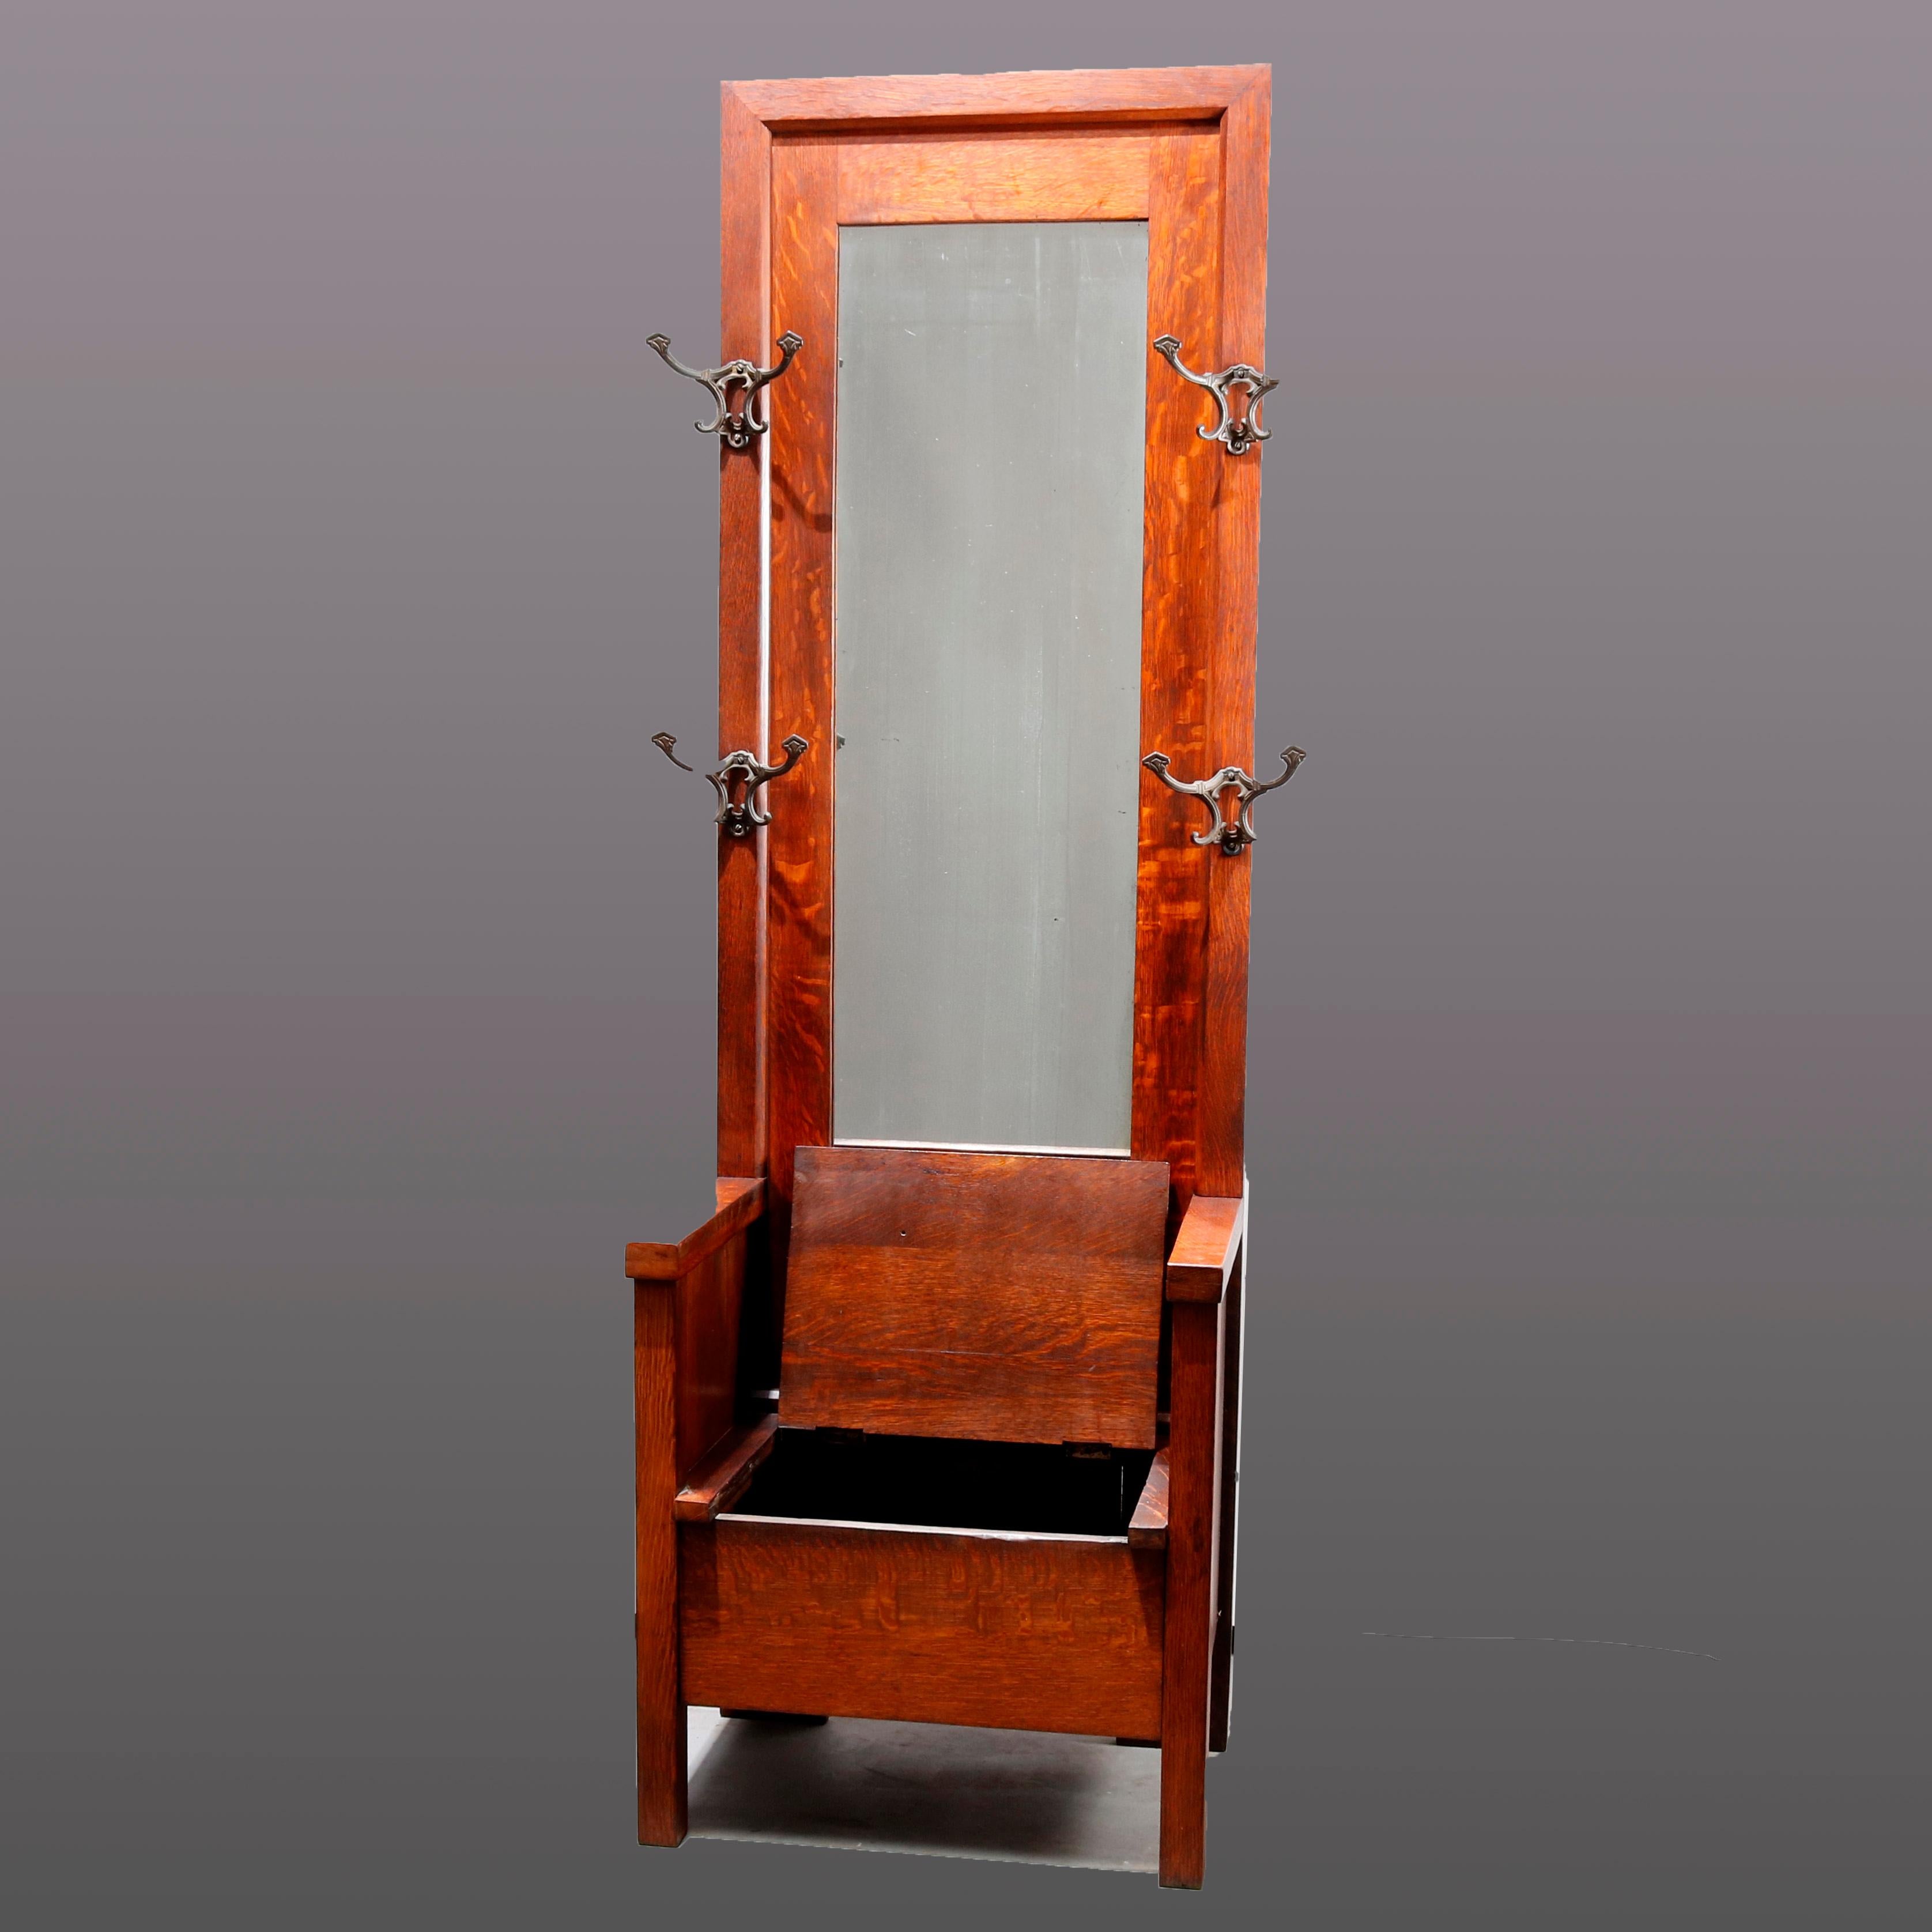 An antique Arts & Crafts Stickley School hall seat by Stickley School offers cube form with lift top seat having storage compartment and solid arm surmounted by tall mirror flanked by cast bronze apparel hooks, circa 1910

Measures: 73